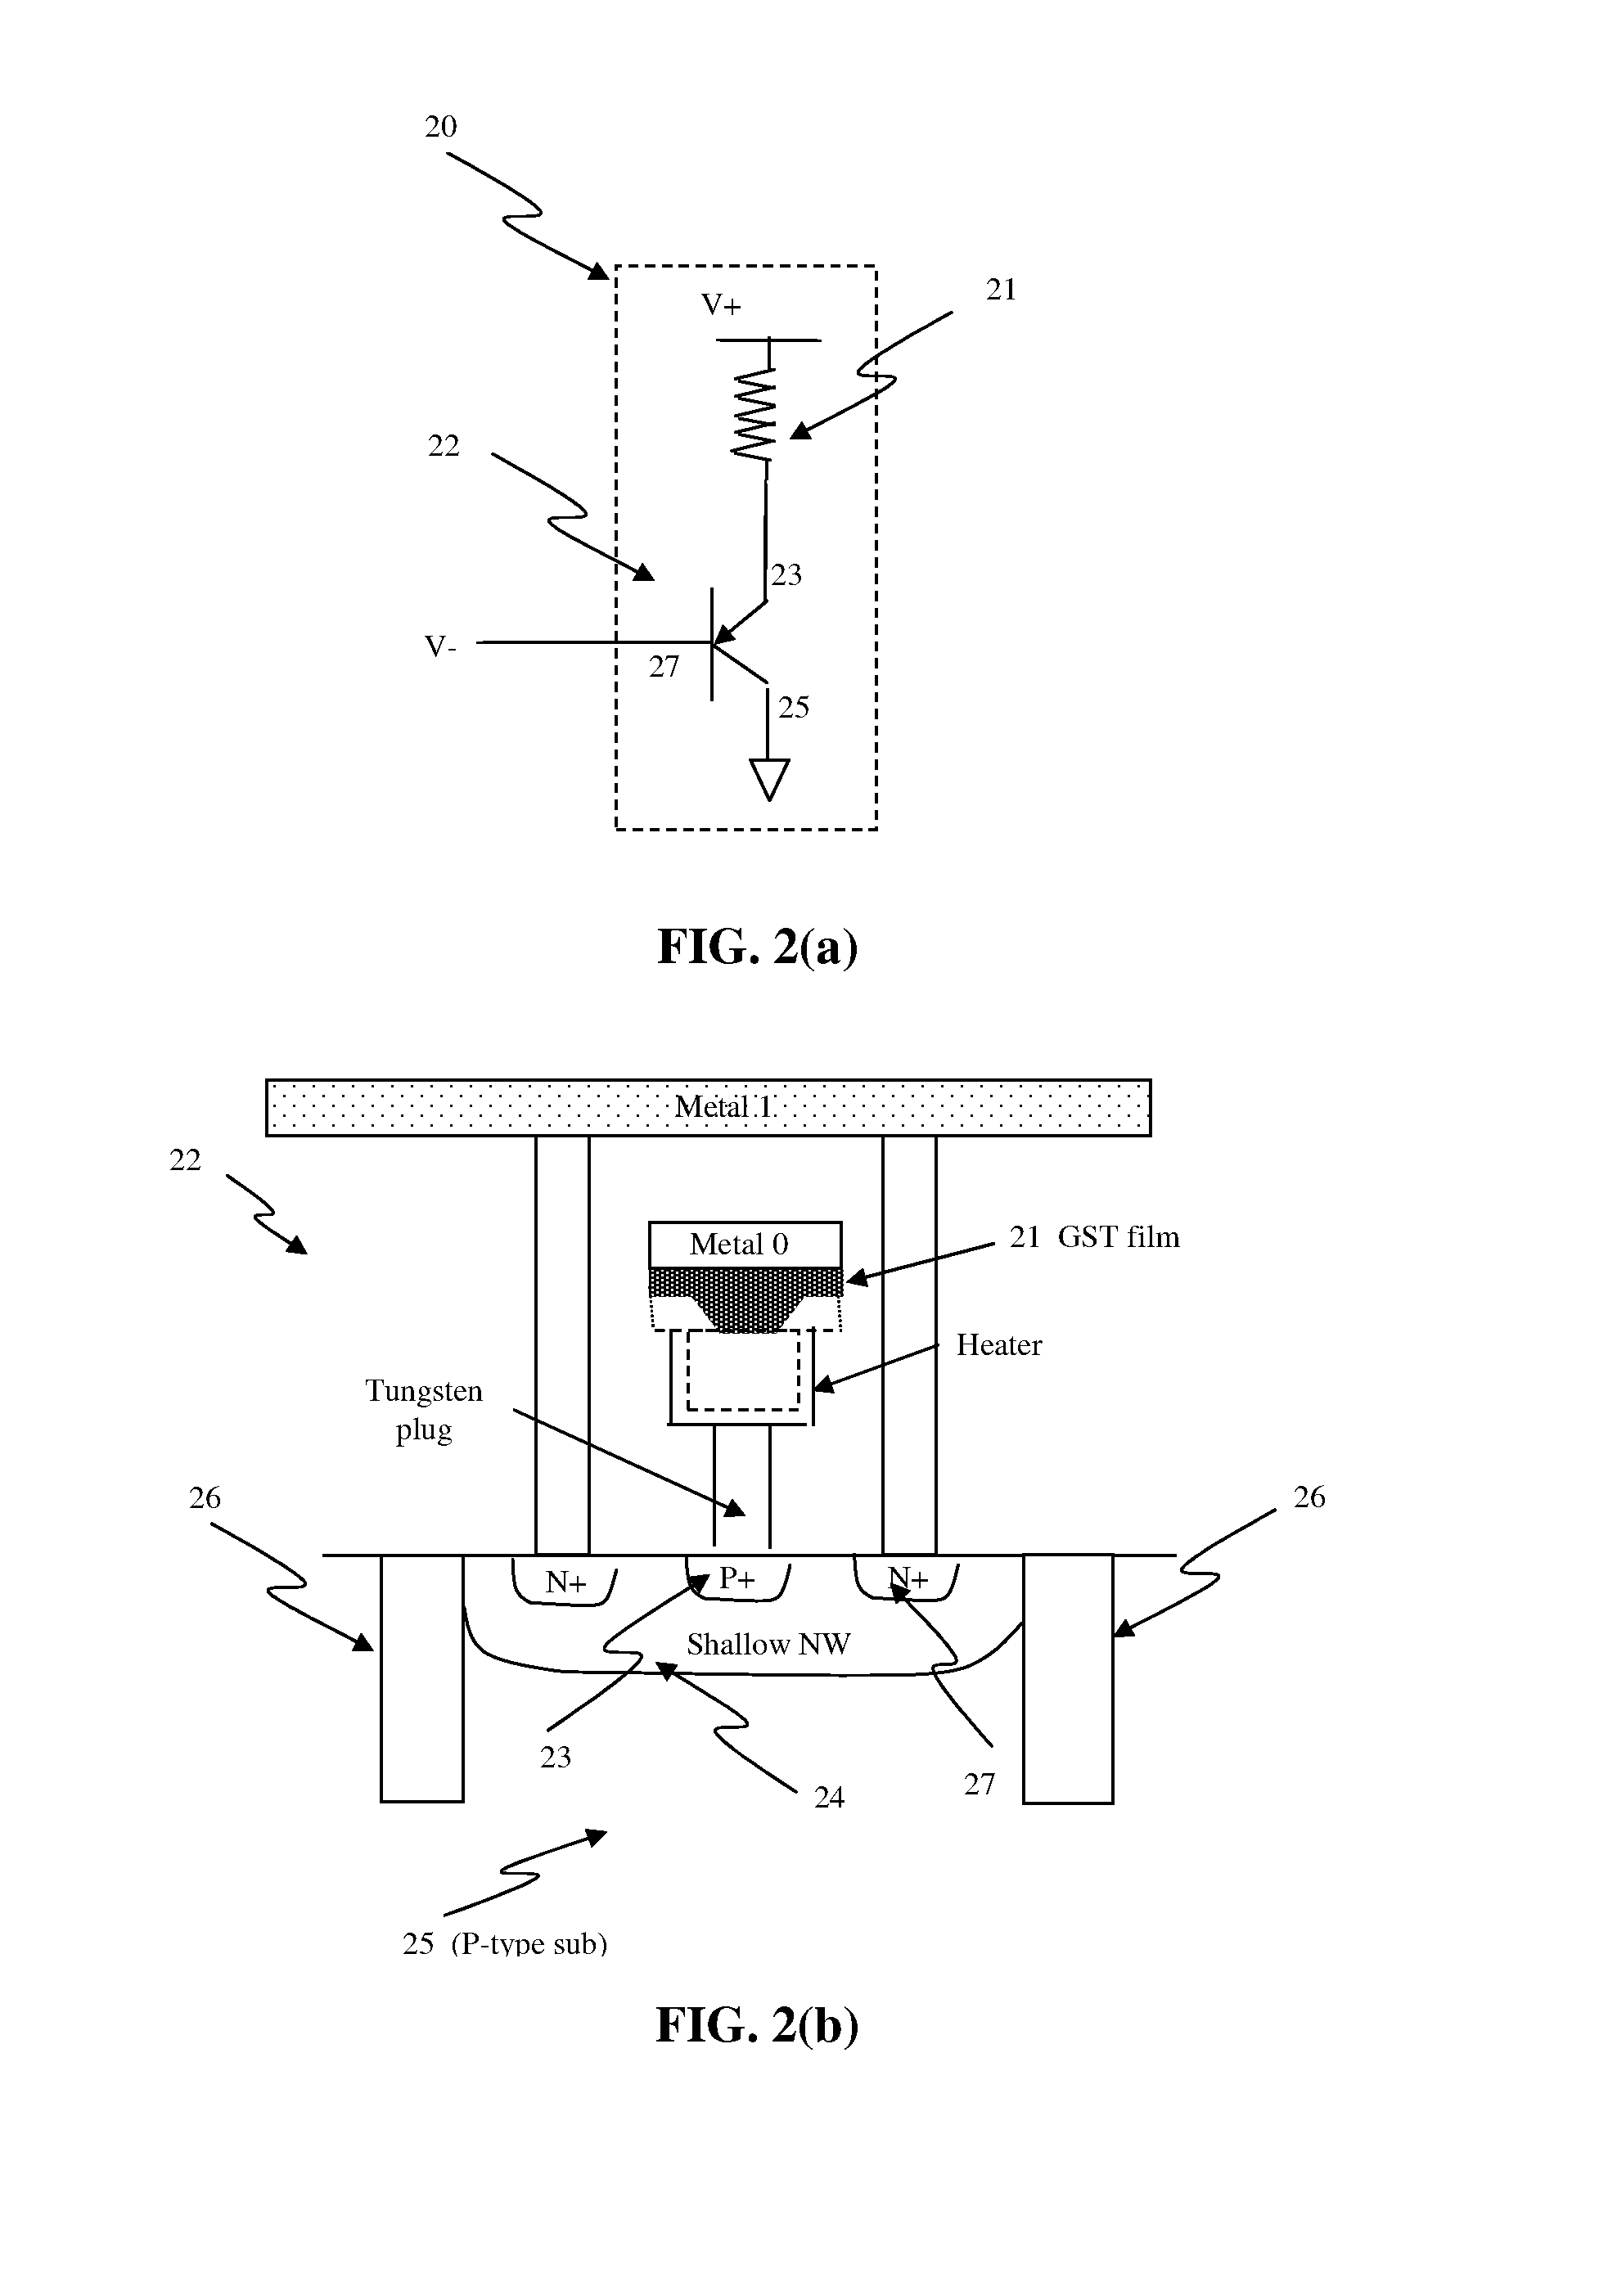 Circuit and system of using a polysilicon diode as program selector for resistive devices in CMOS logic processes